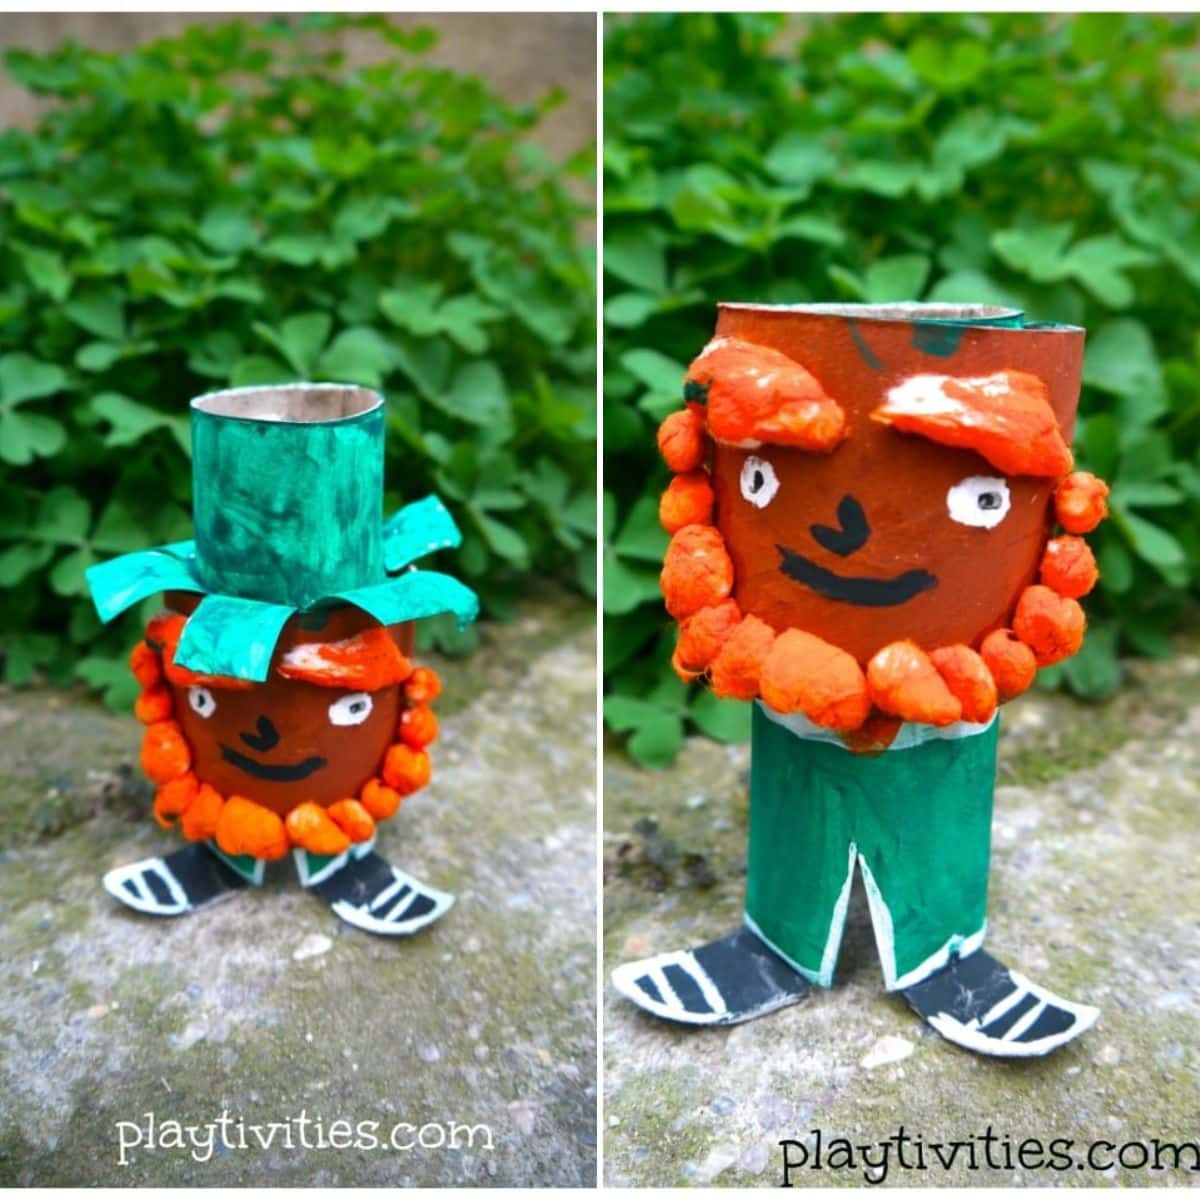 Two images of saint patrick paper roll crafts.